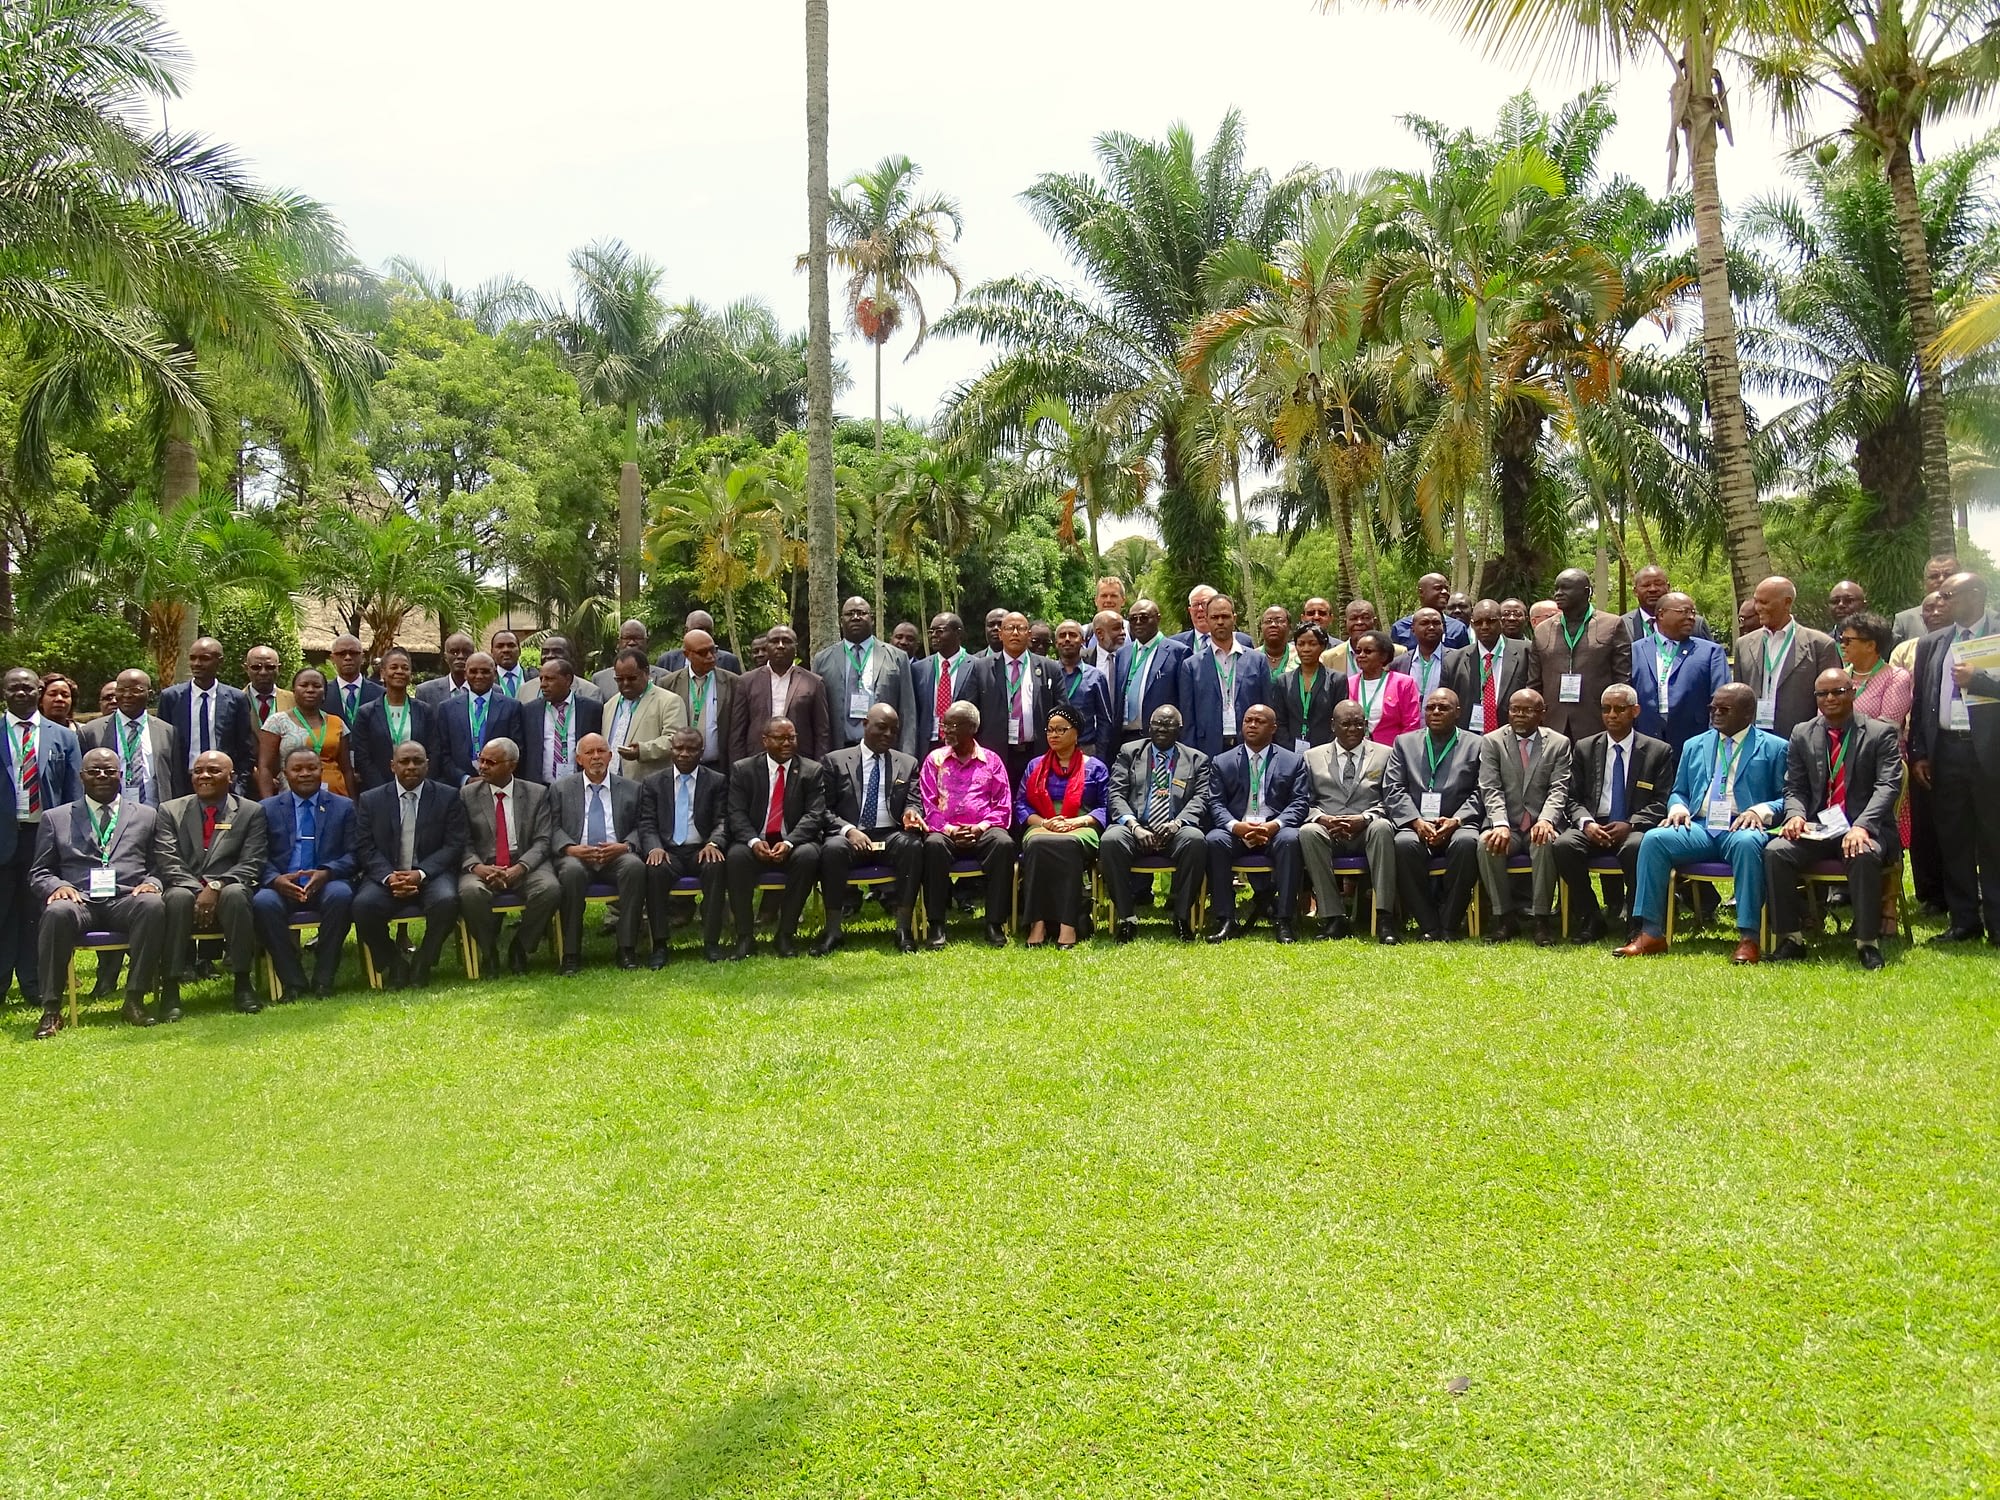 Delegates of the meeting organized by CIMMYT and ASARECA pose for a group photo. (Photo: Jerome Bossuet)